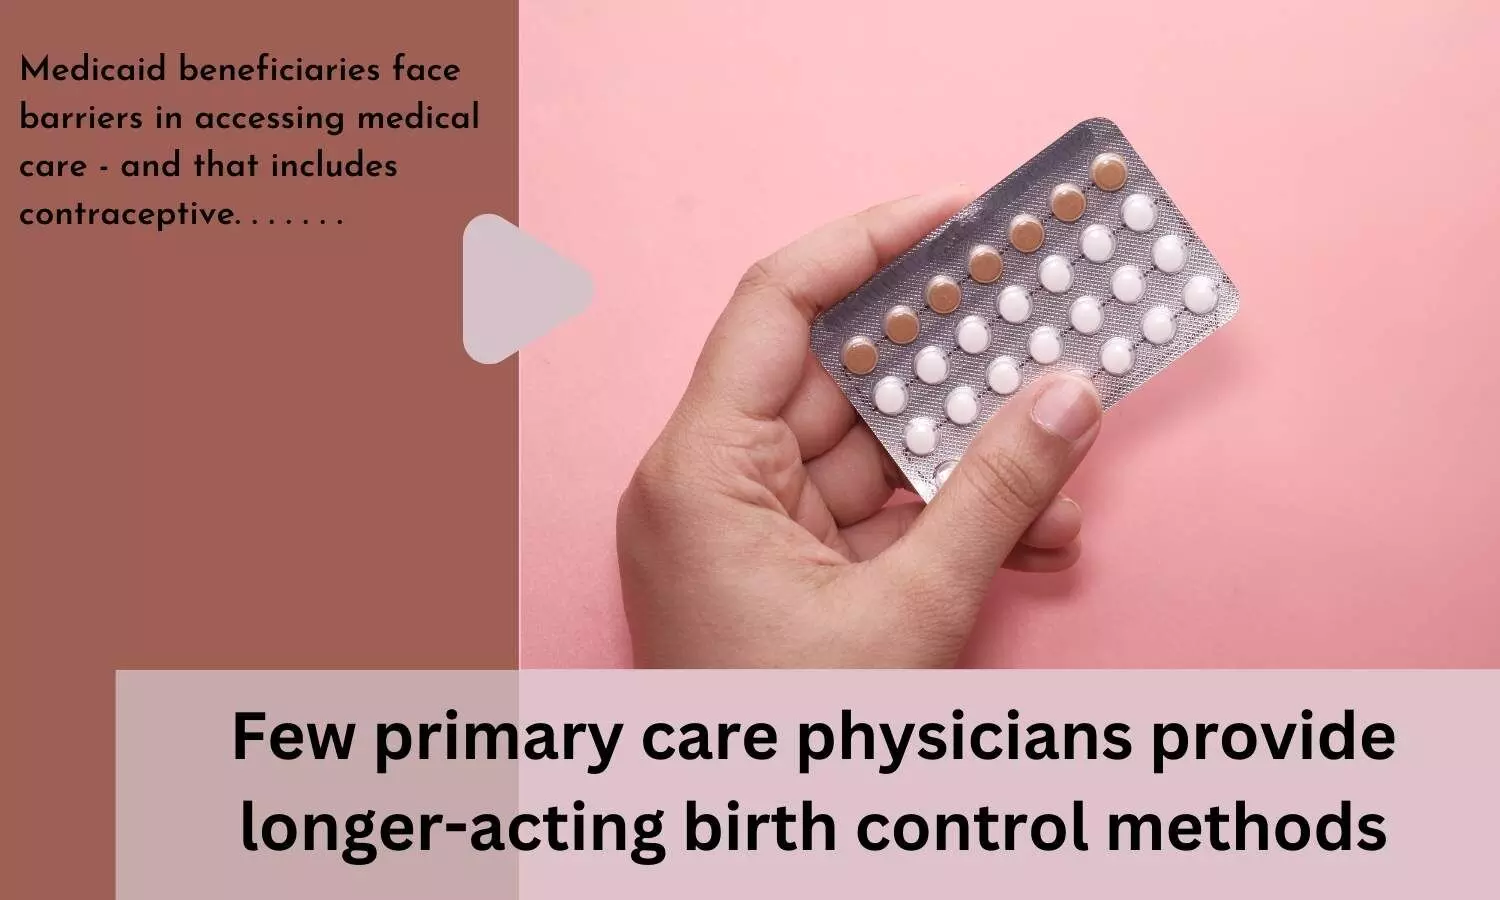 Few primary care physicians provide longer-acting birth control methods